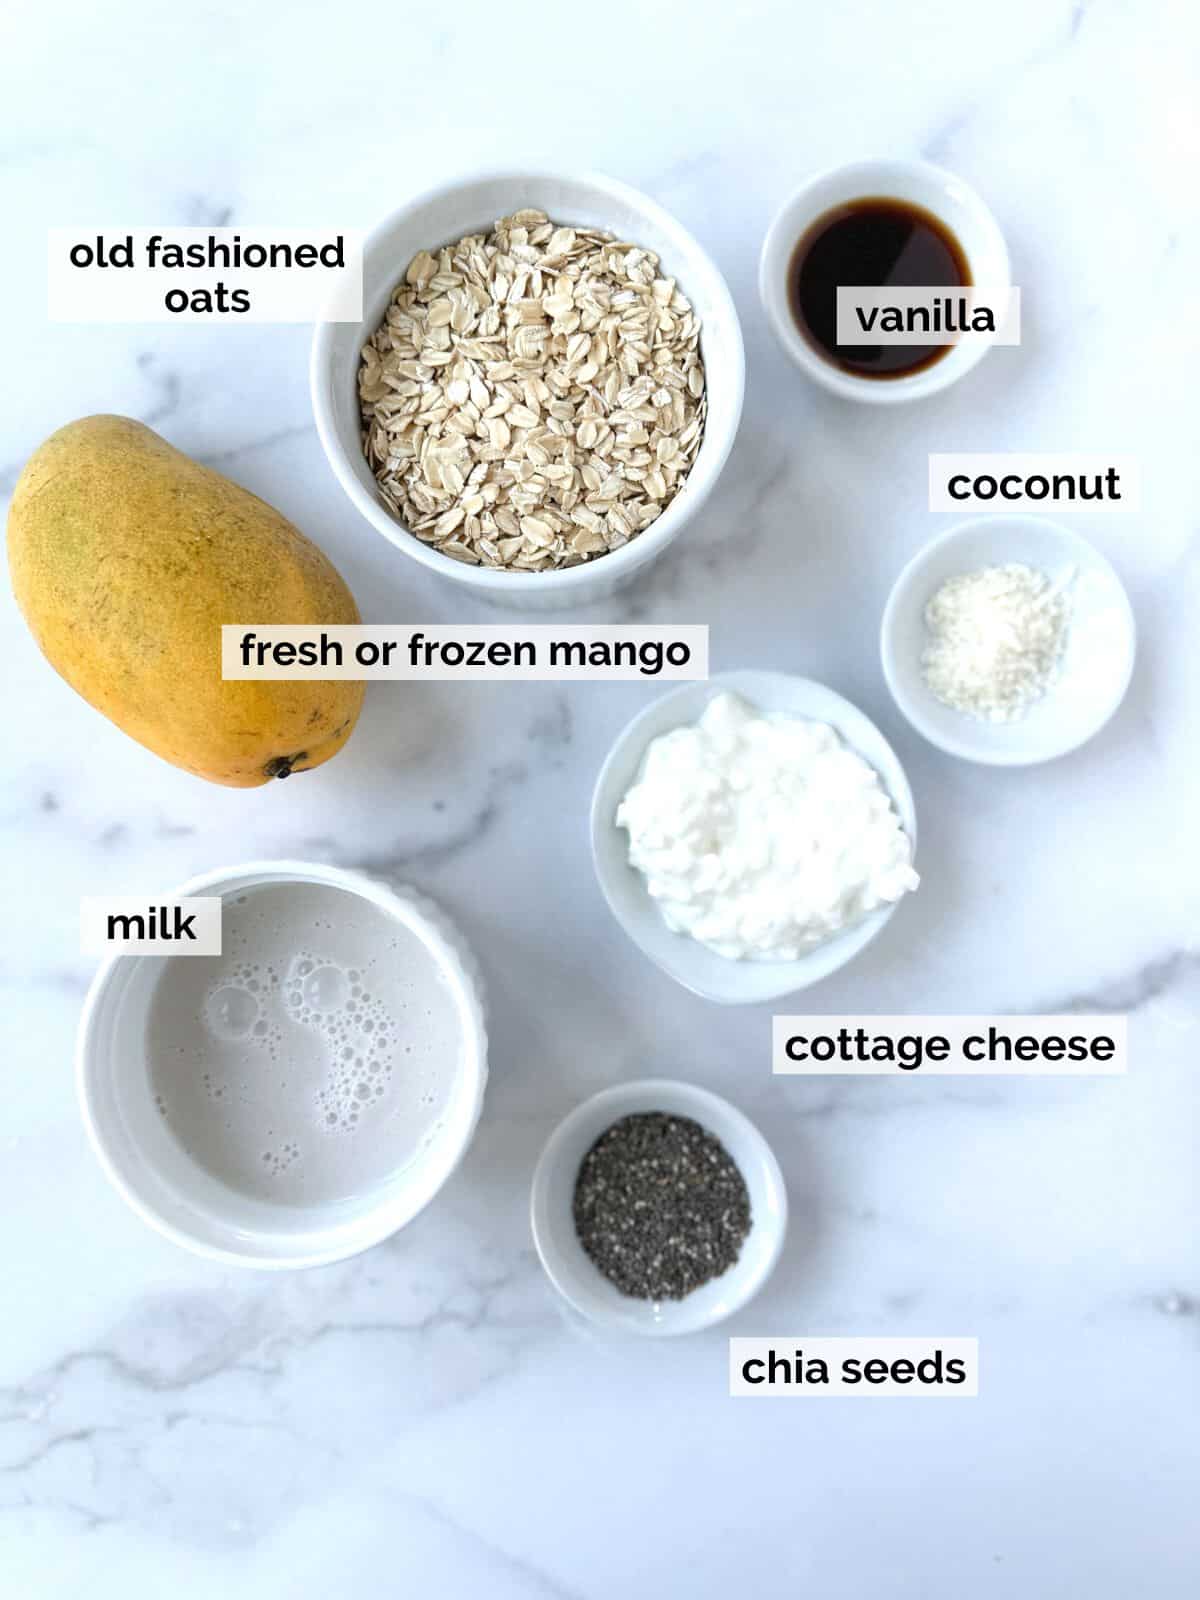 Ingredients for mango overnight oats on a marble background.